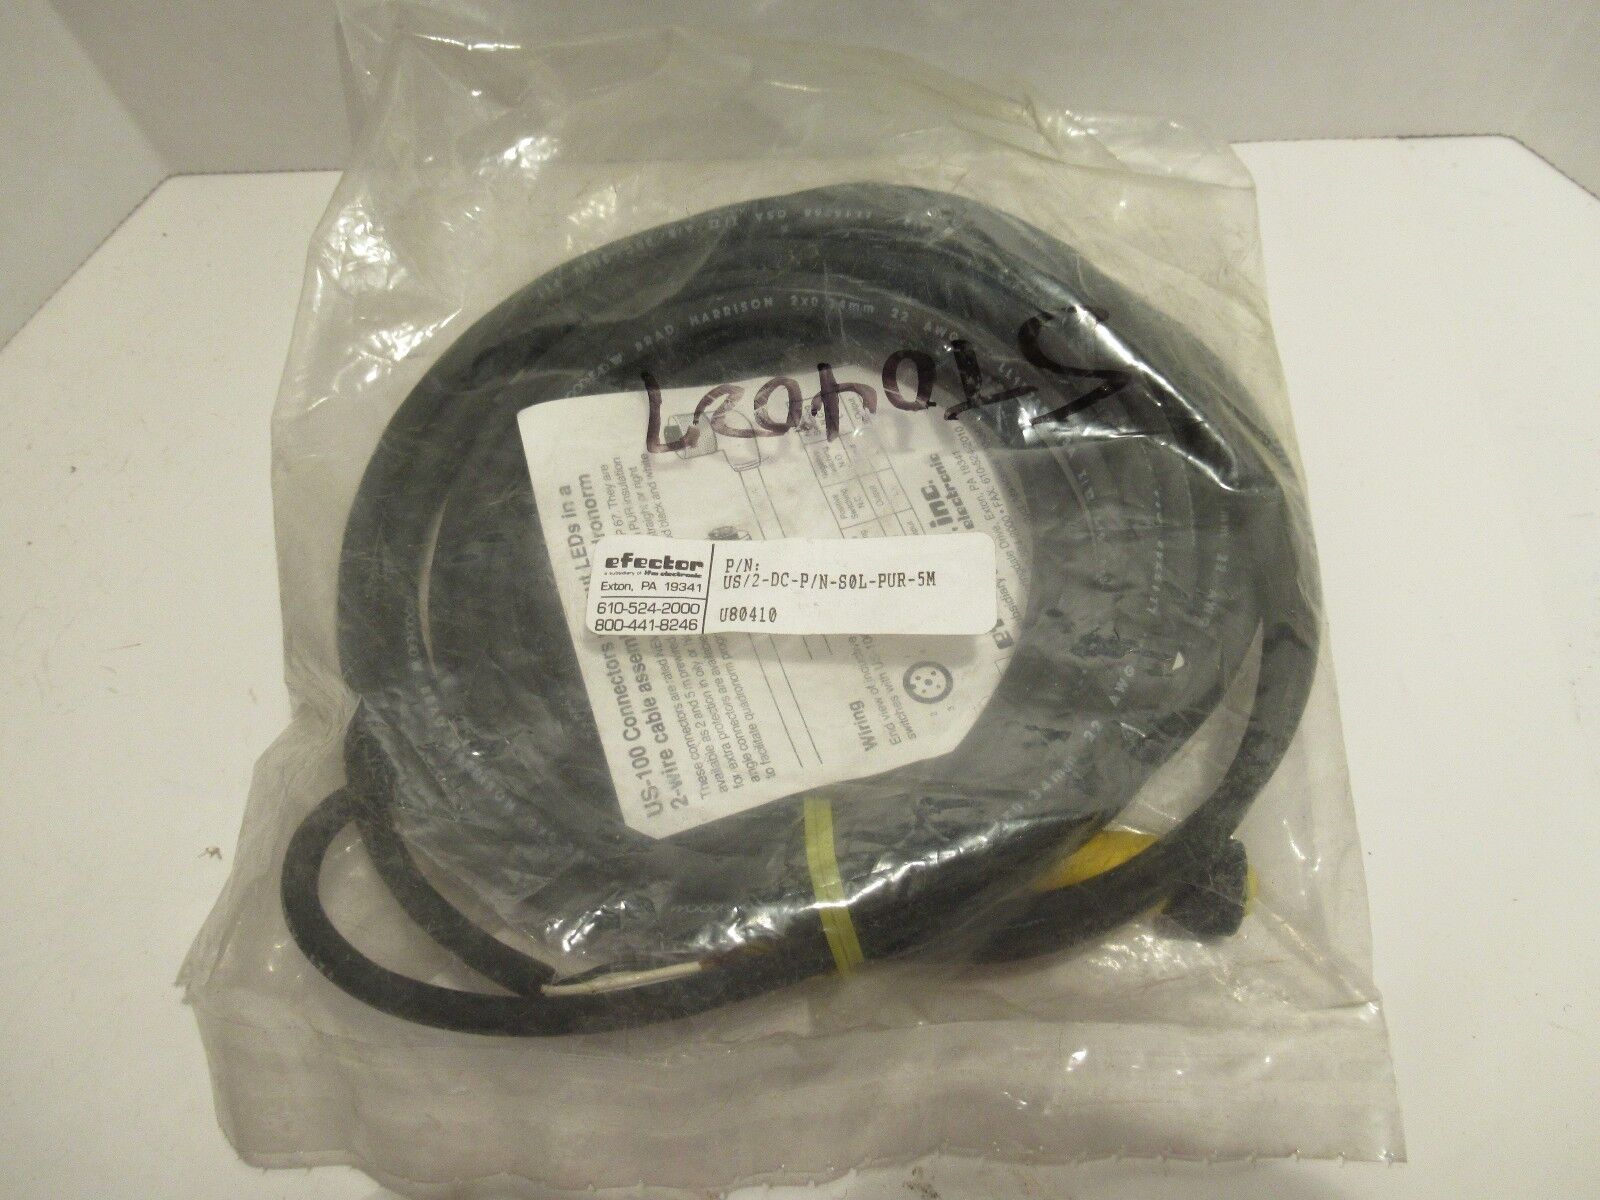 IFM / EFECTOR US/2-DC-P/N-S0L-PUR-5M 4PIN 2 WIRE FEMALE CORDSET NEW 